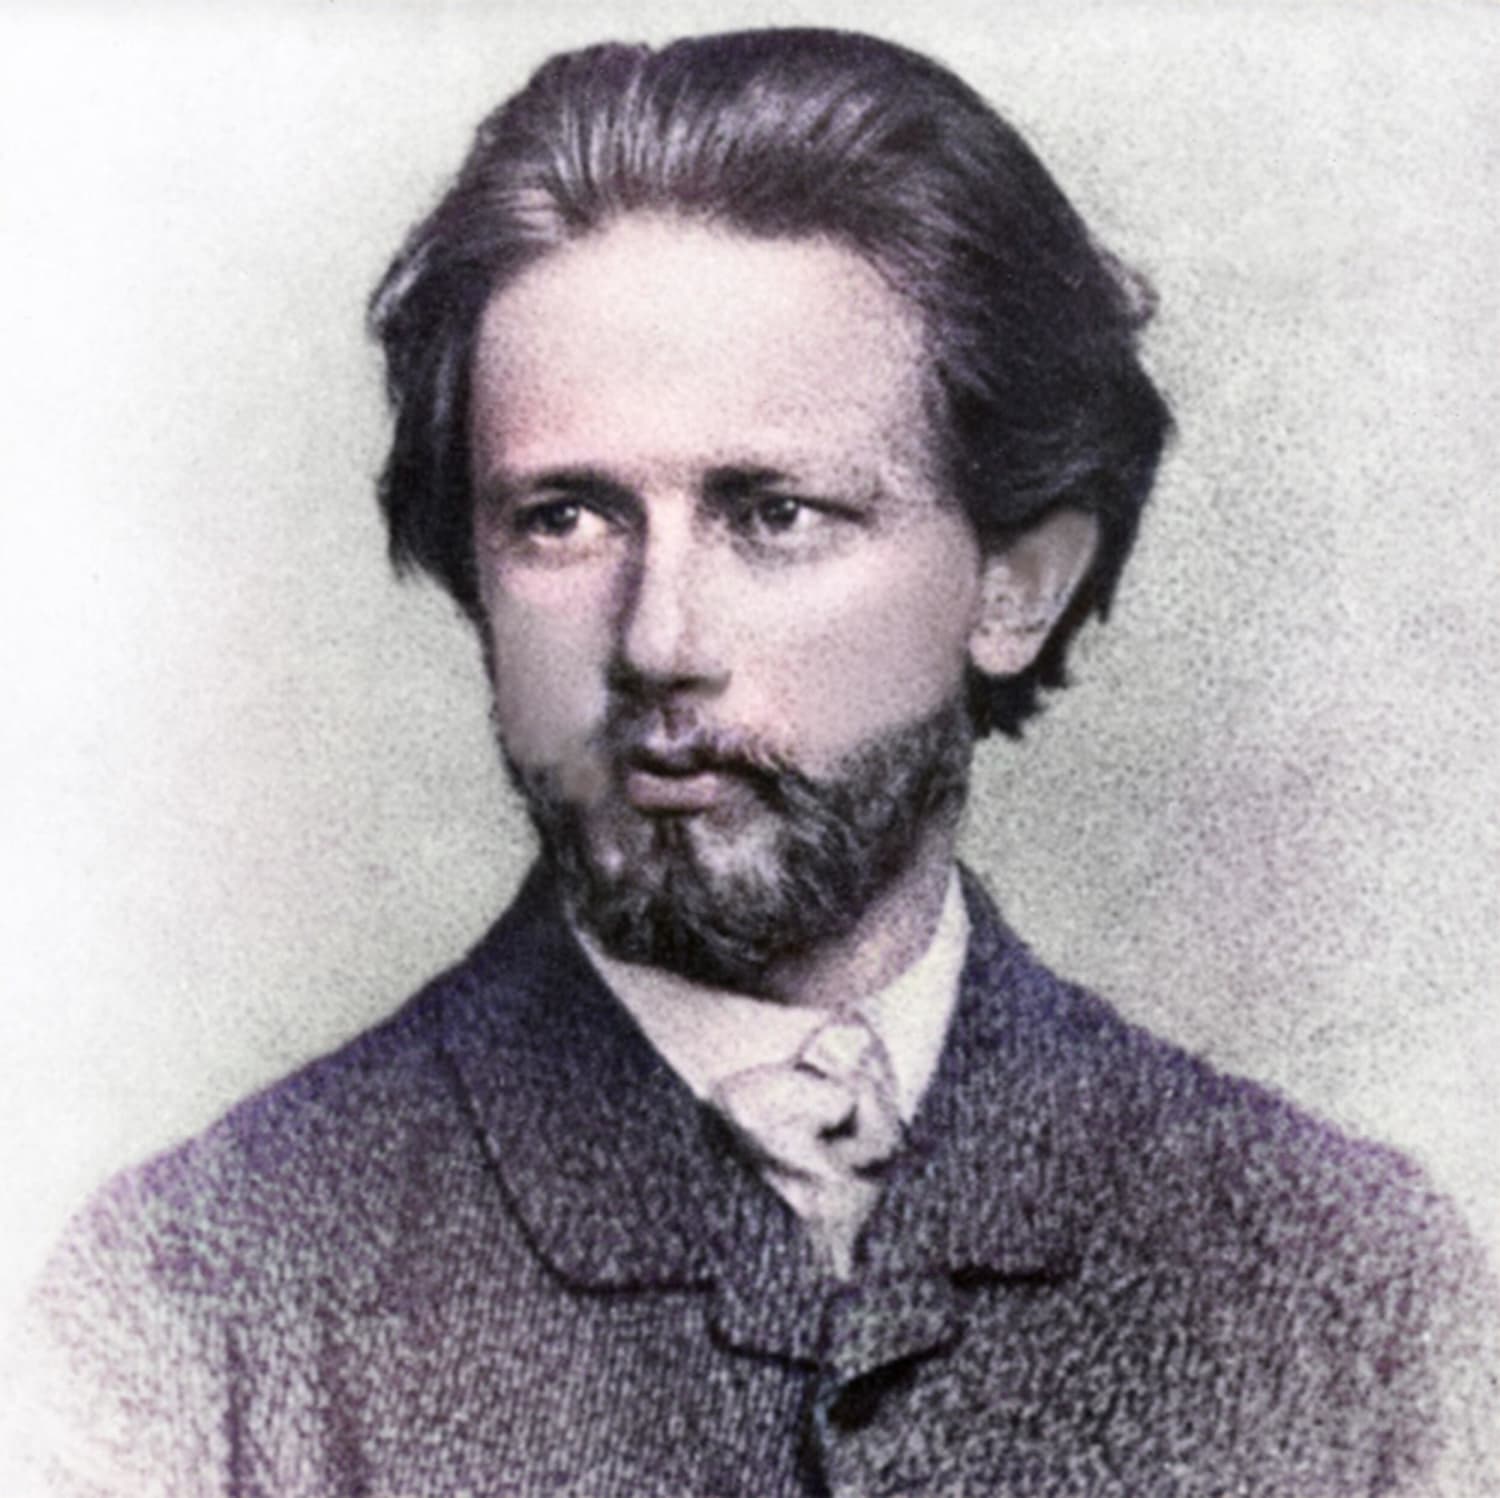 Colorized version of young Tchaikovsky